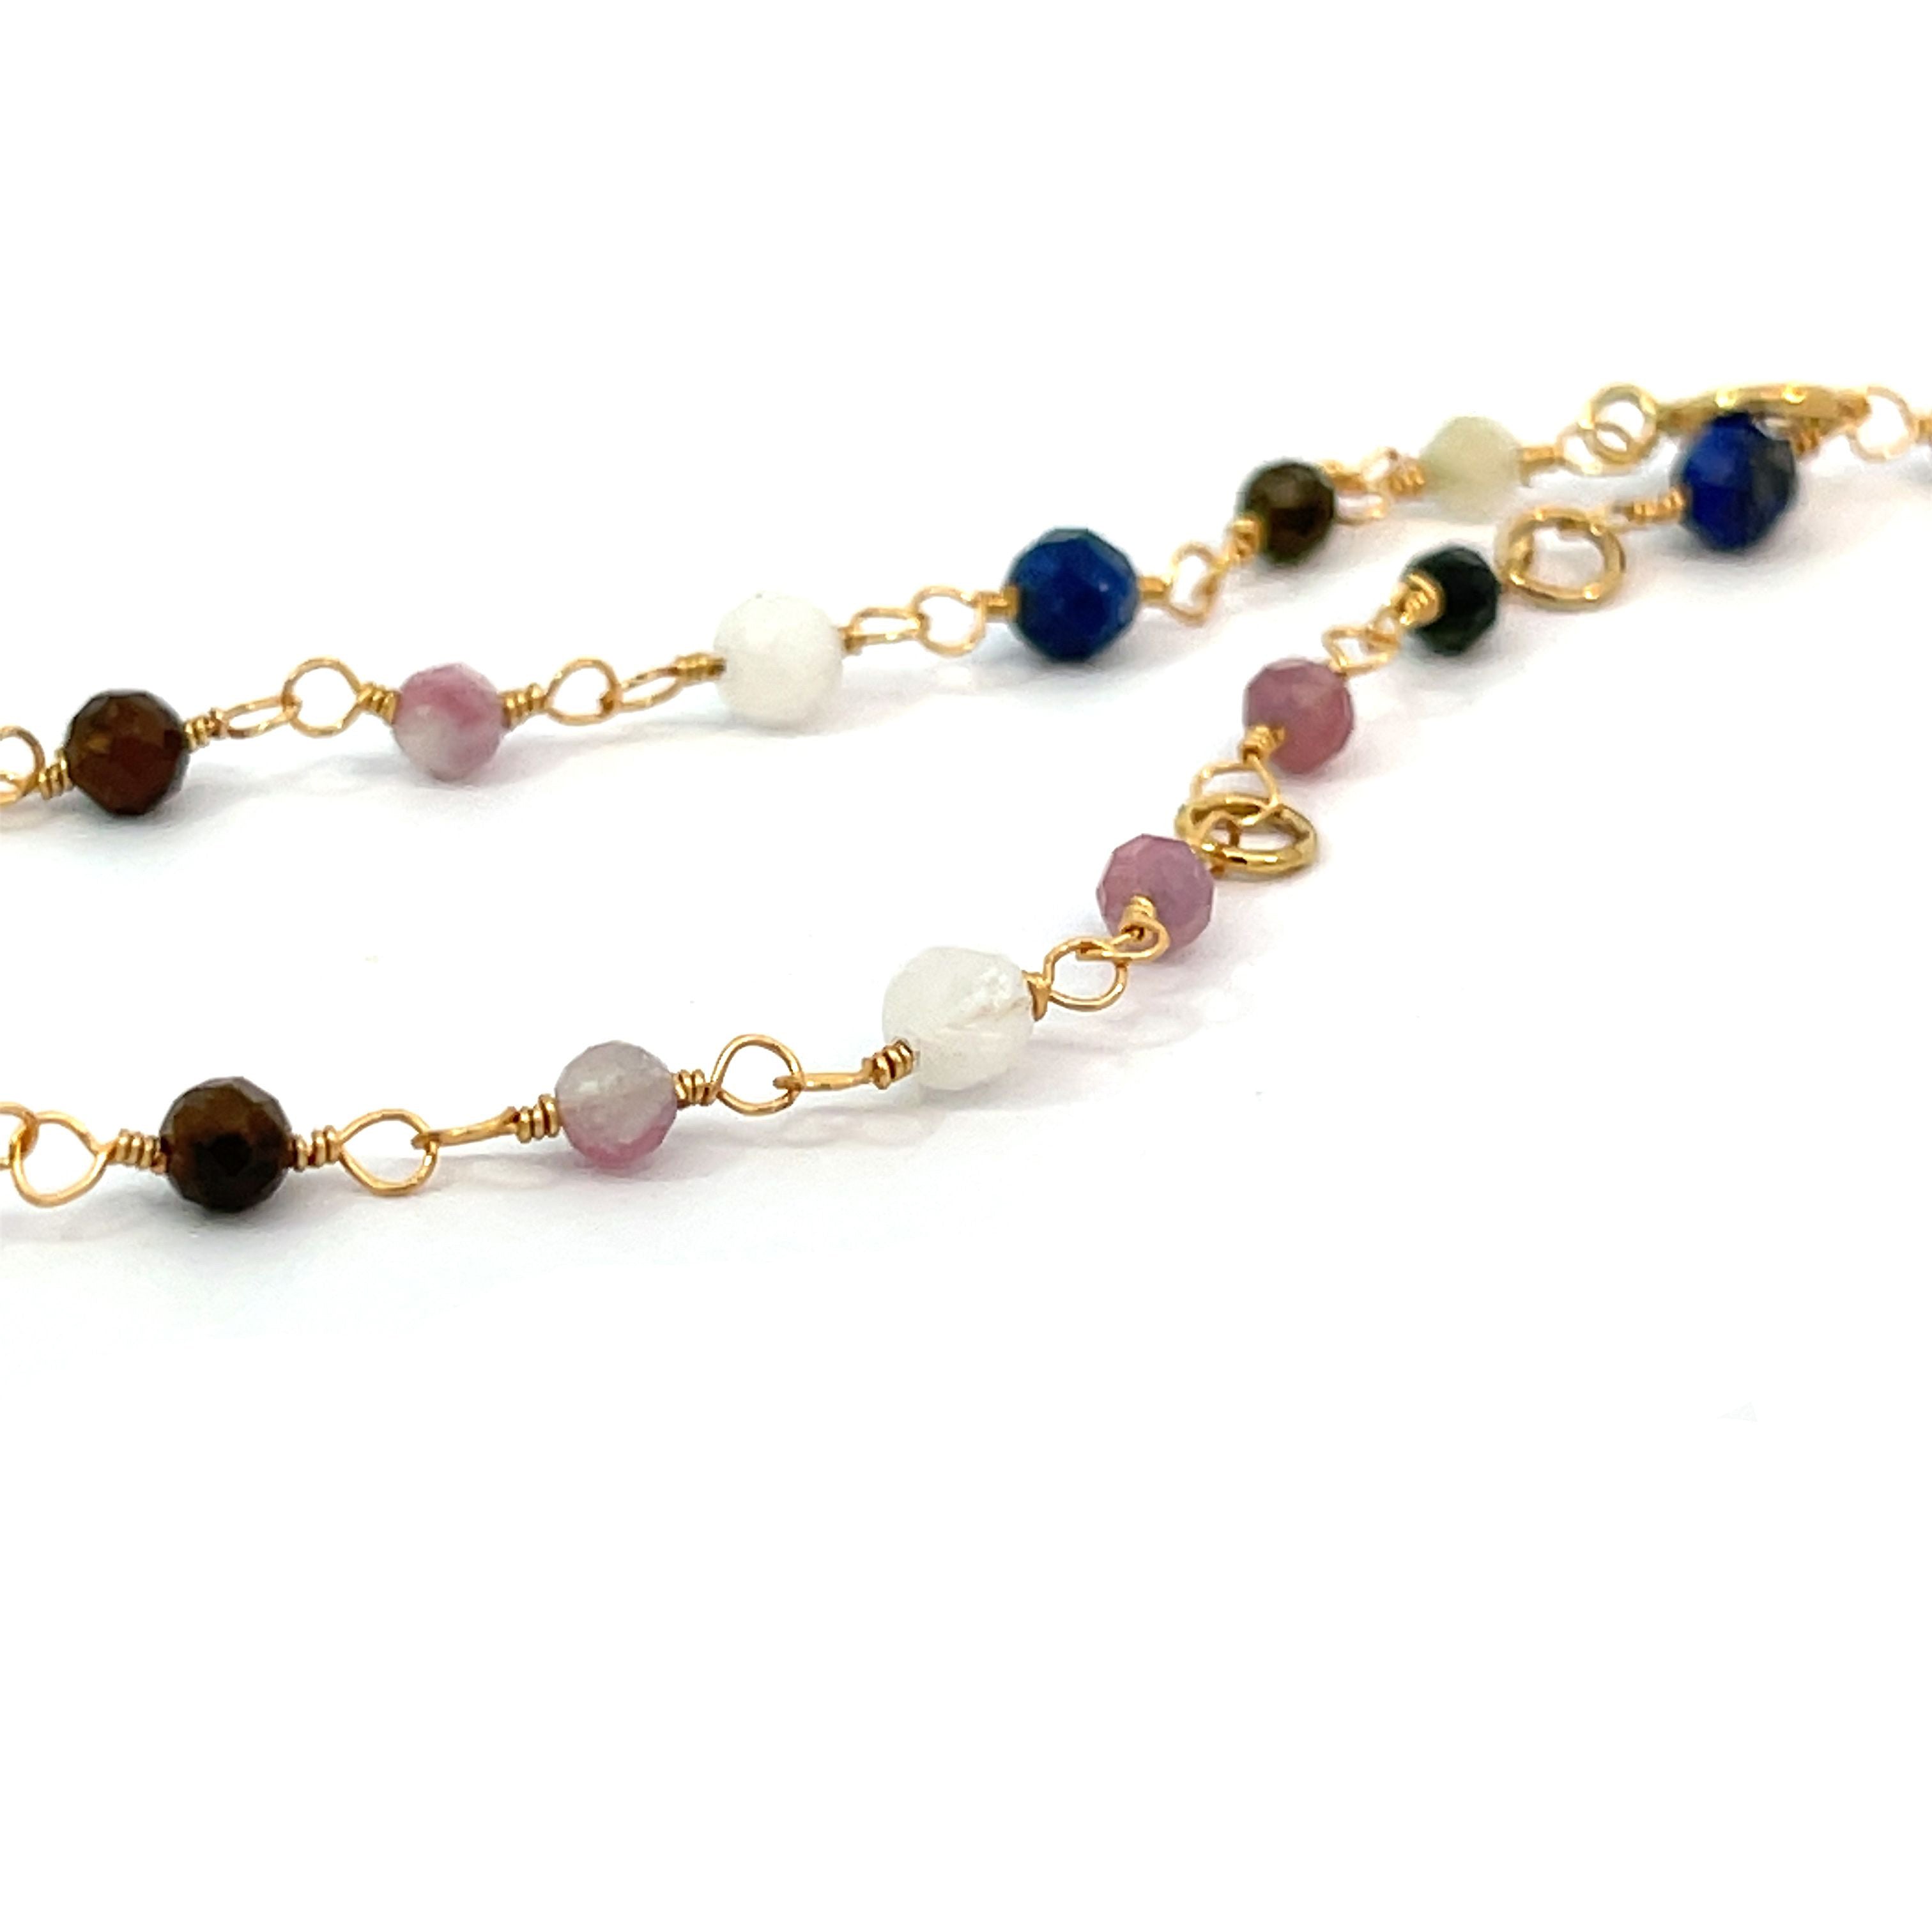 “Chiyo” Fresh Water Pearl and Mix Stones Necklace